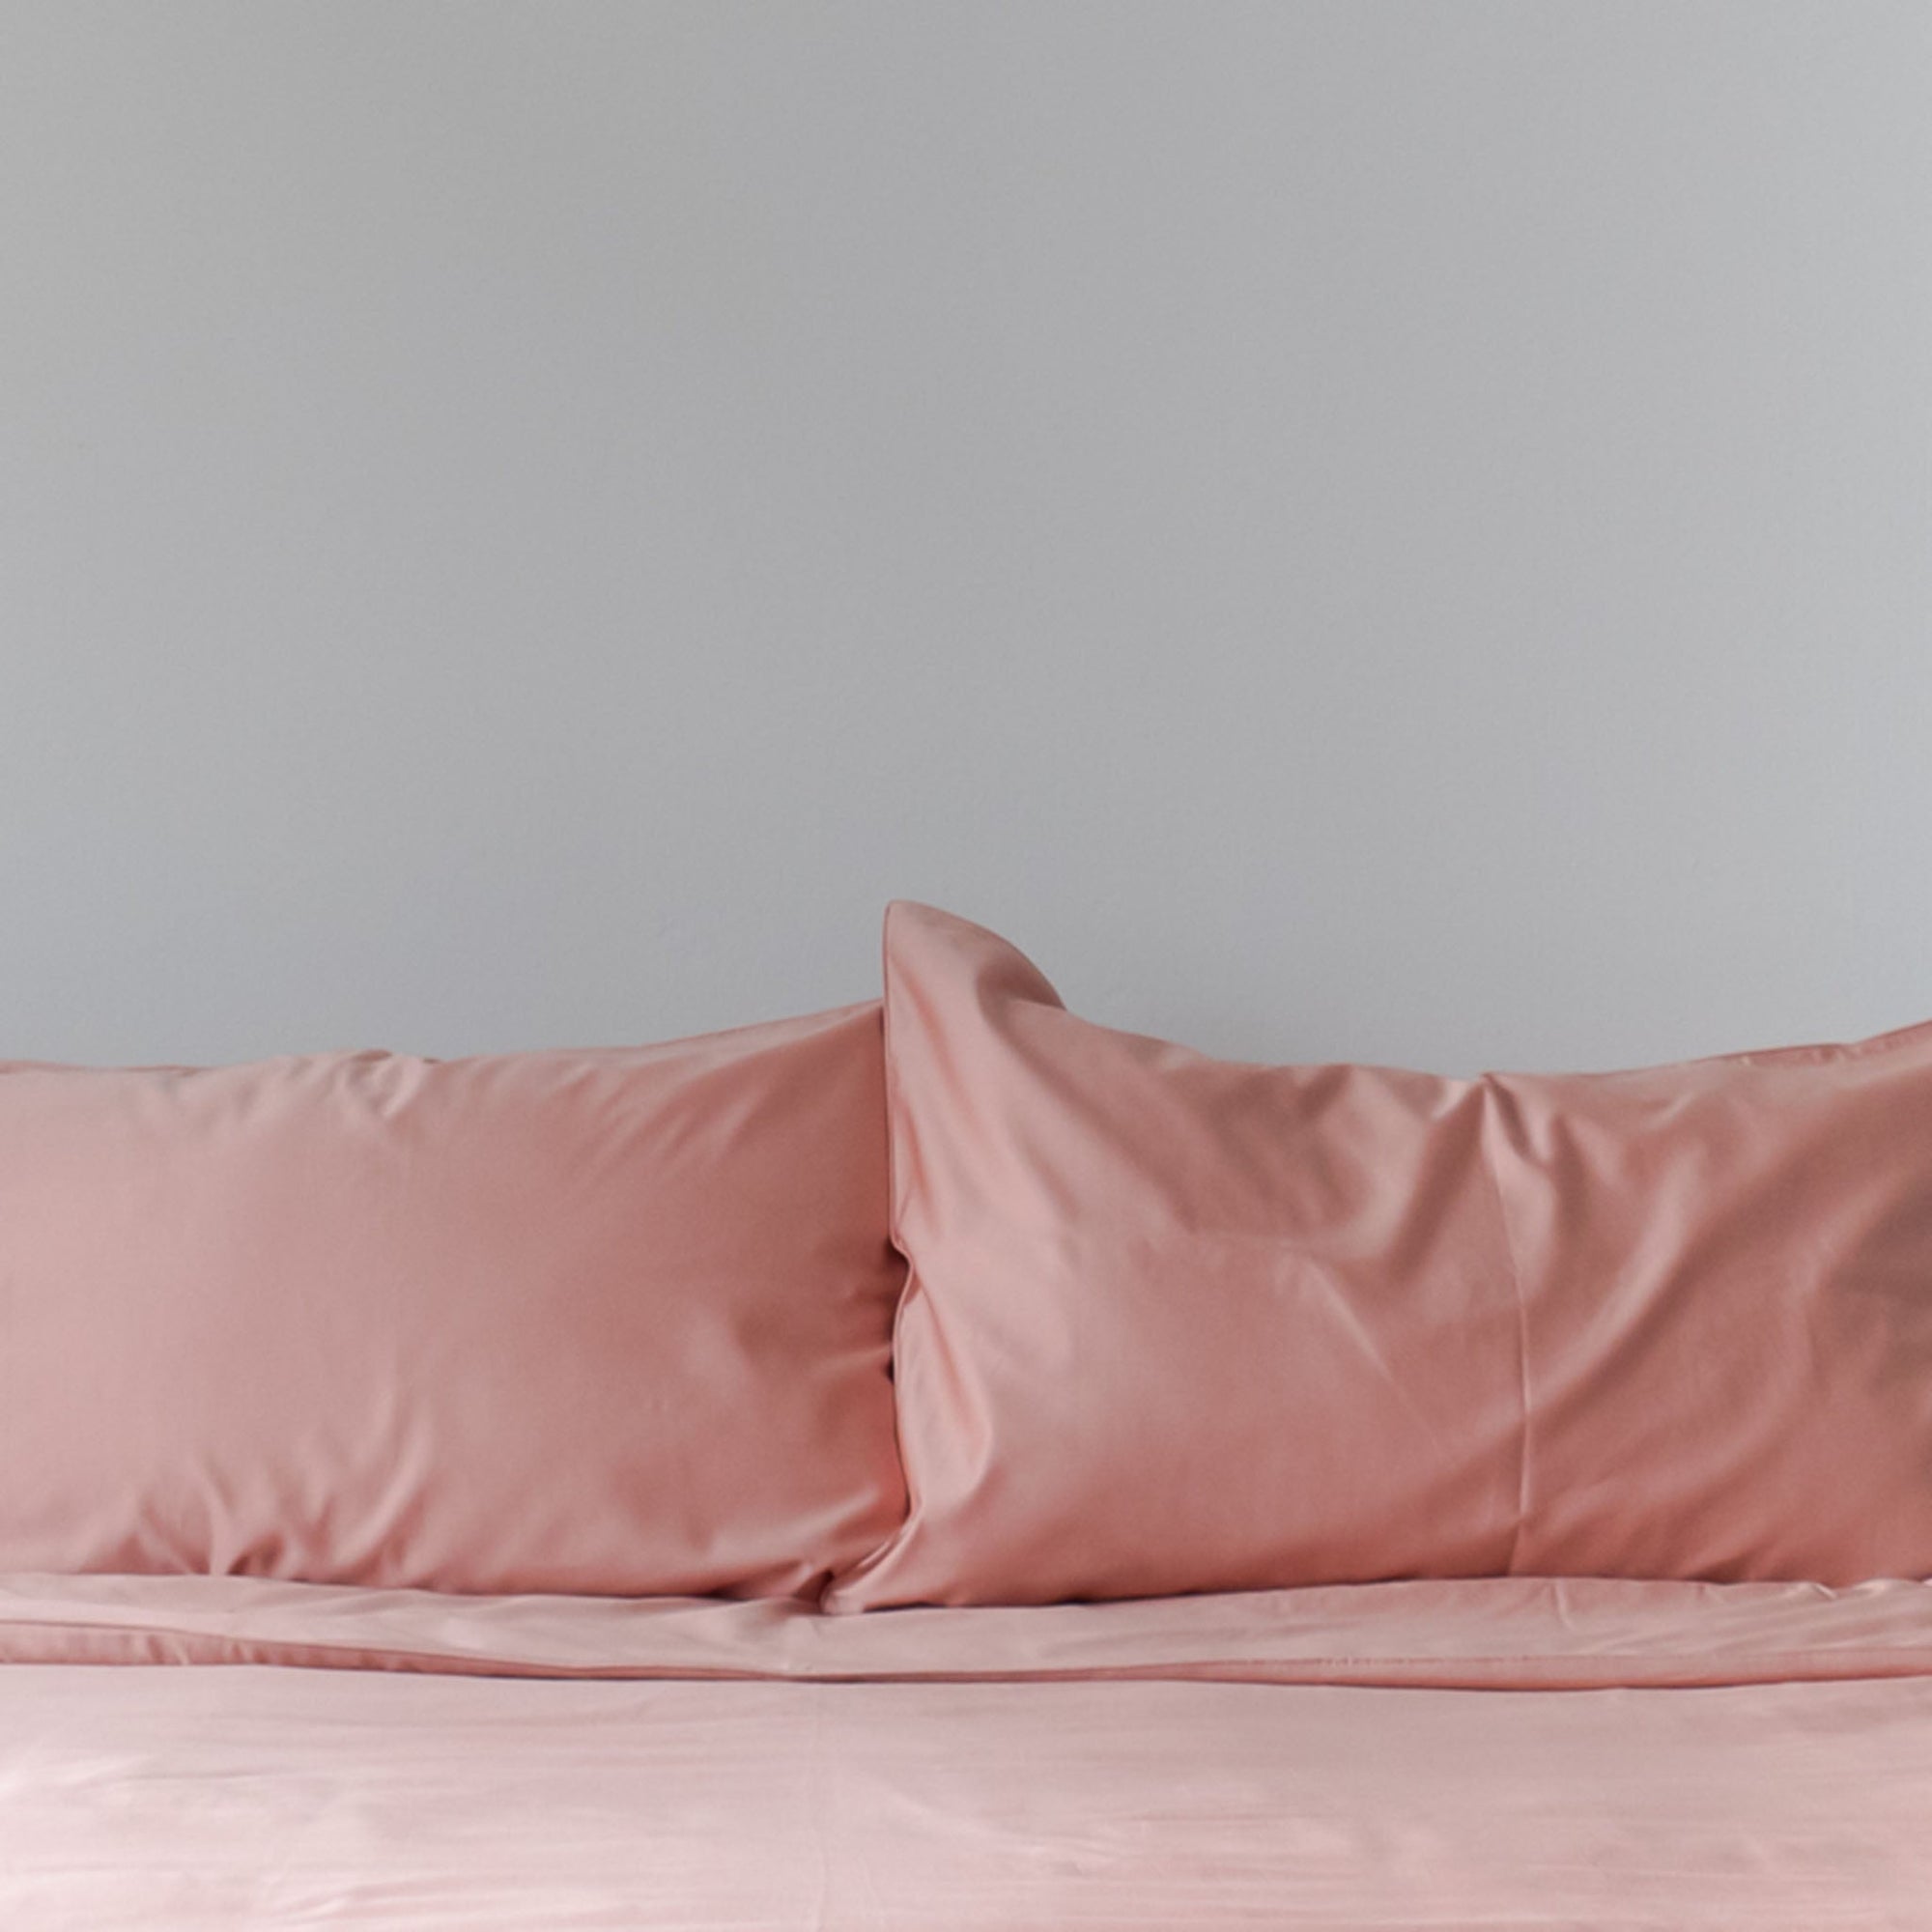 Tea Rose Cotton Bed Sheets Fitted Sheet Set with Tencel fitted sheet, Tencel Pillow Case, Tencel Duvet Cover. Buy Tea Rose Tencel Fitted bed sheet set at Weavve Home, Shop Egyptian Cotton Bed Sheets Singapore and Luxury Hotel Sheets. 400 High Thread Count Bed Sheet. 